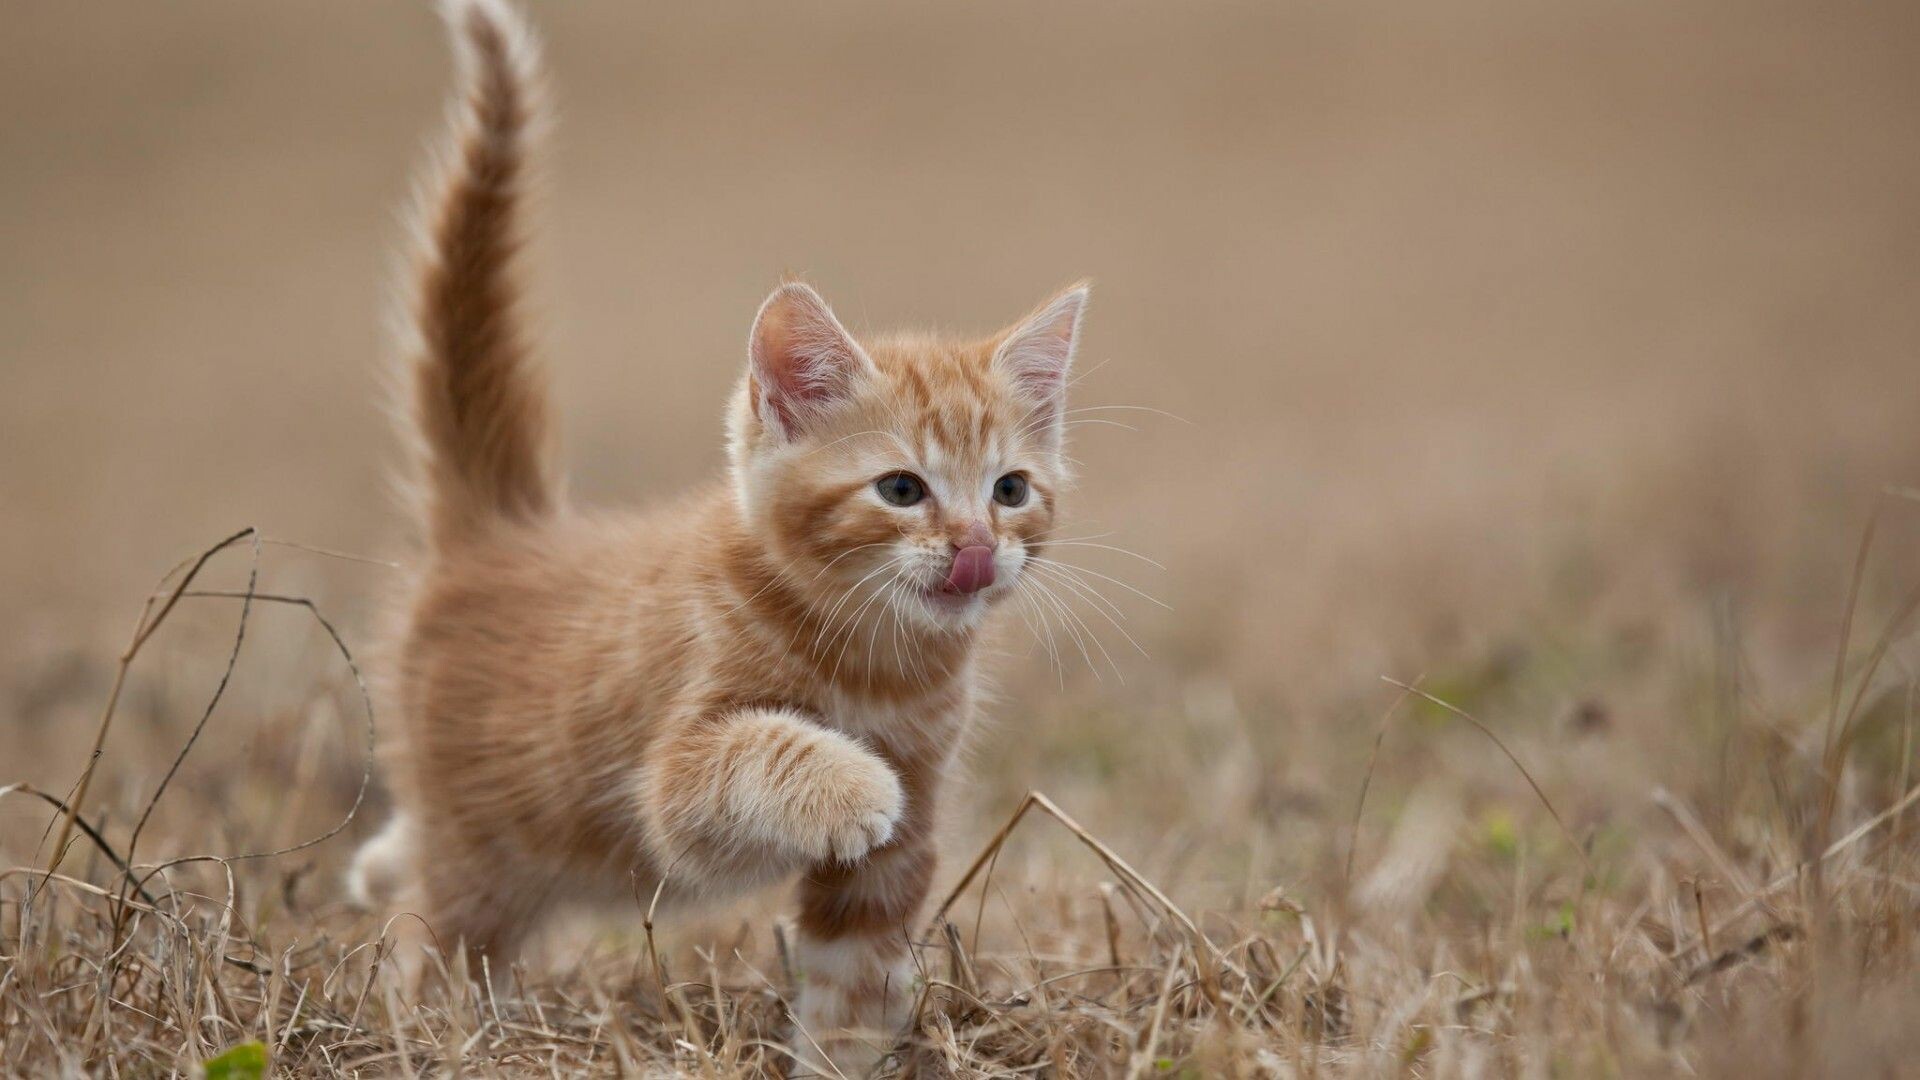 Kitten: Feline companion, May express great affection toward humans or other animals. 1920x1080 Full HD Background.